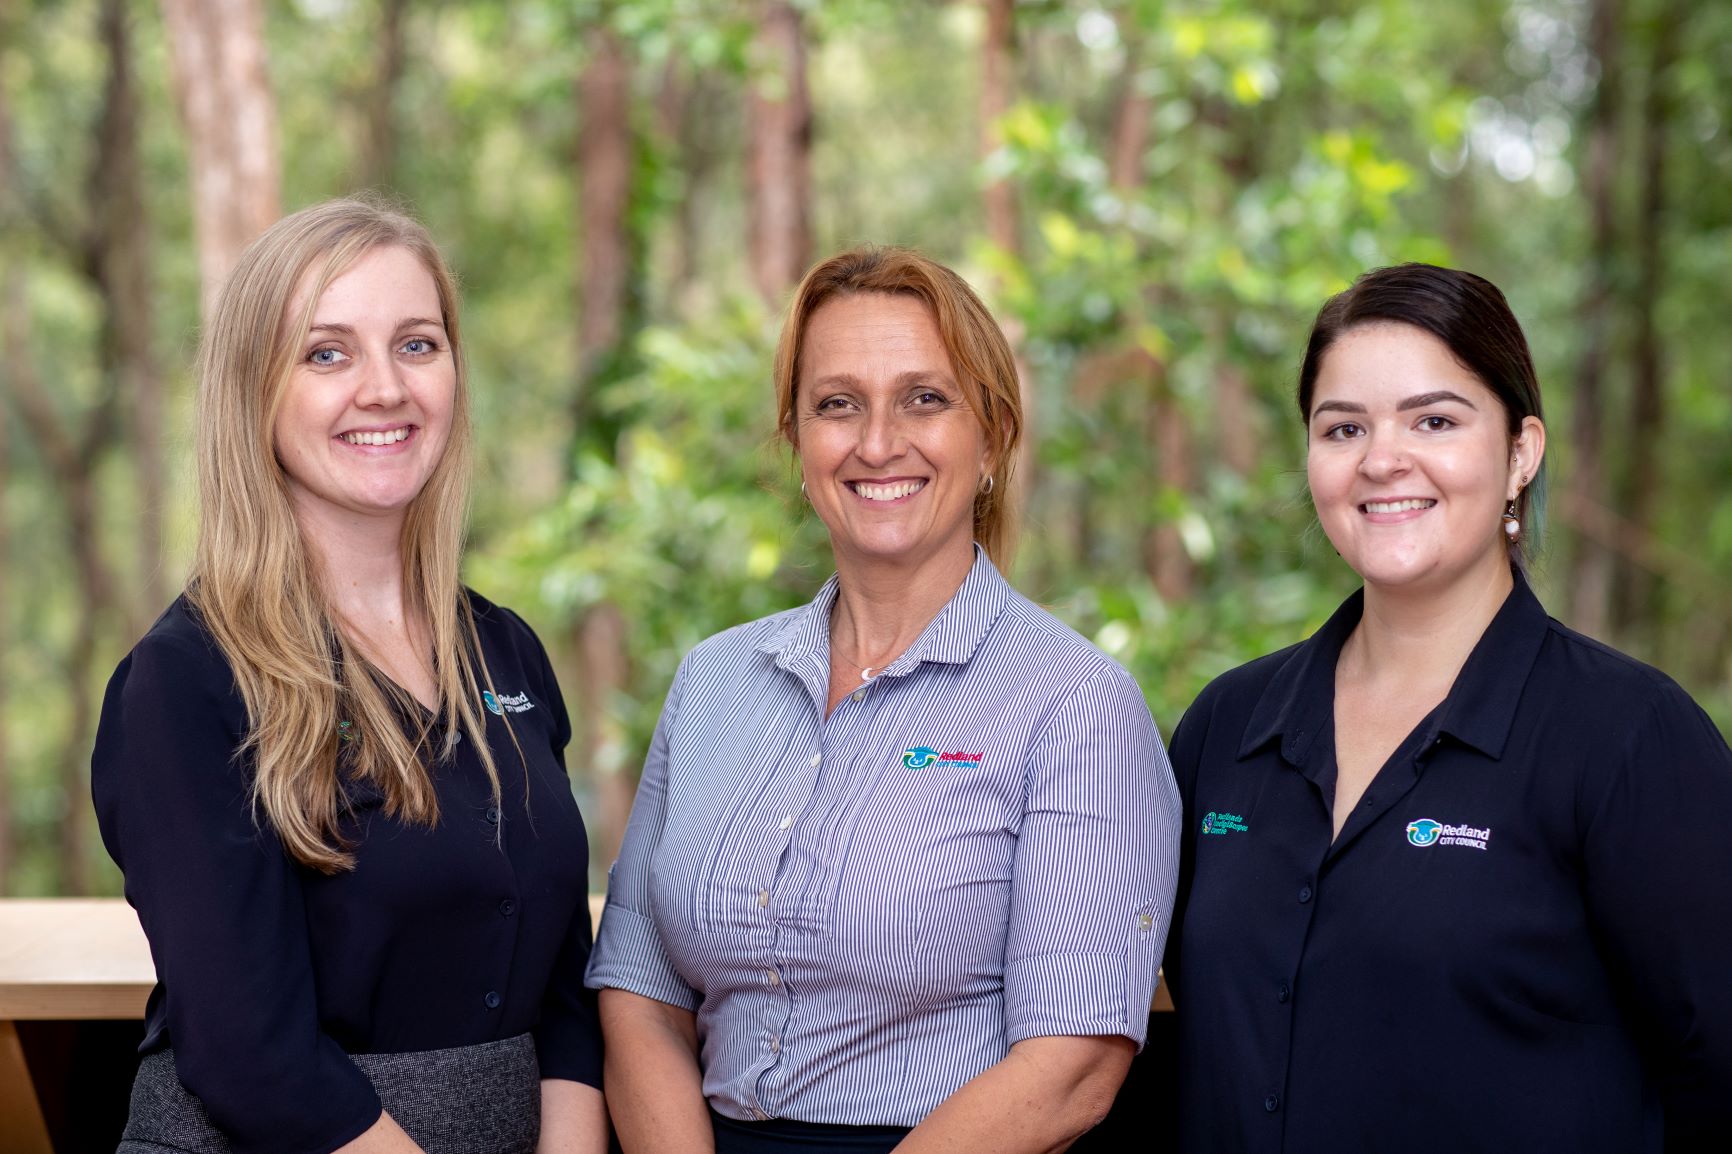 Three women standing together ready to serve you with bushland in the background.